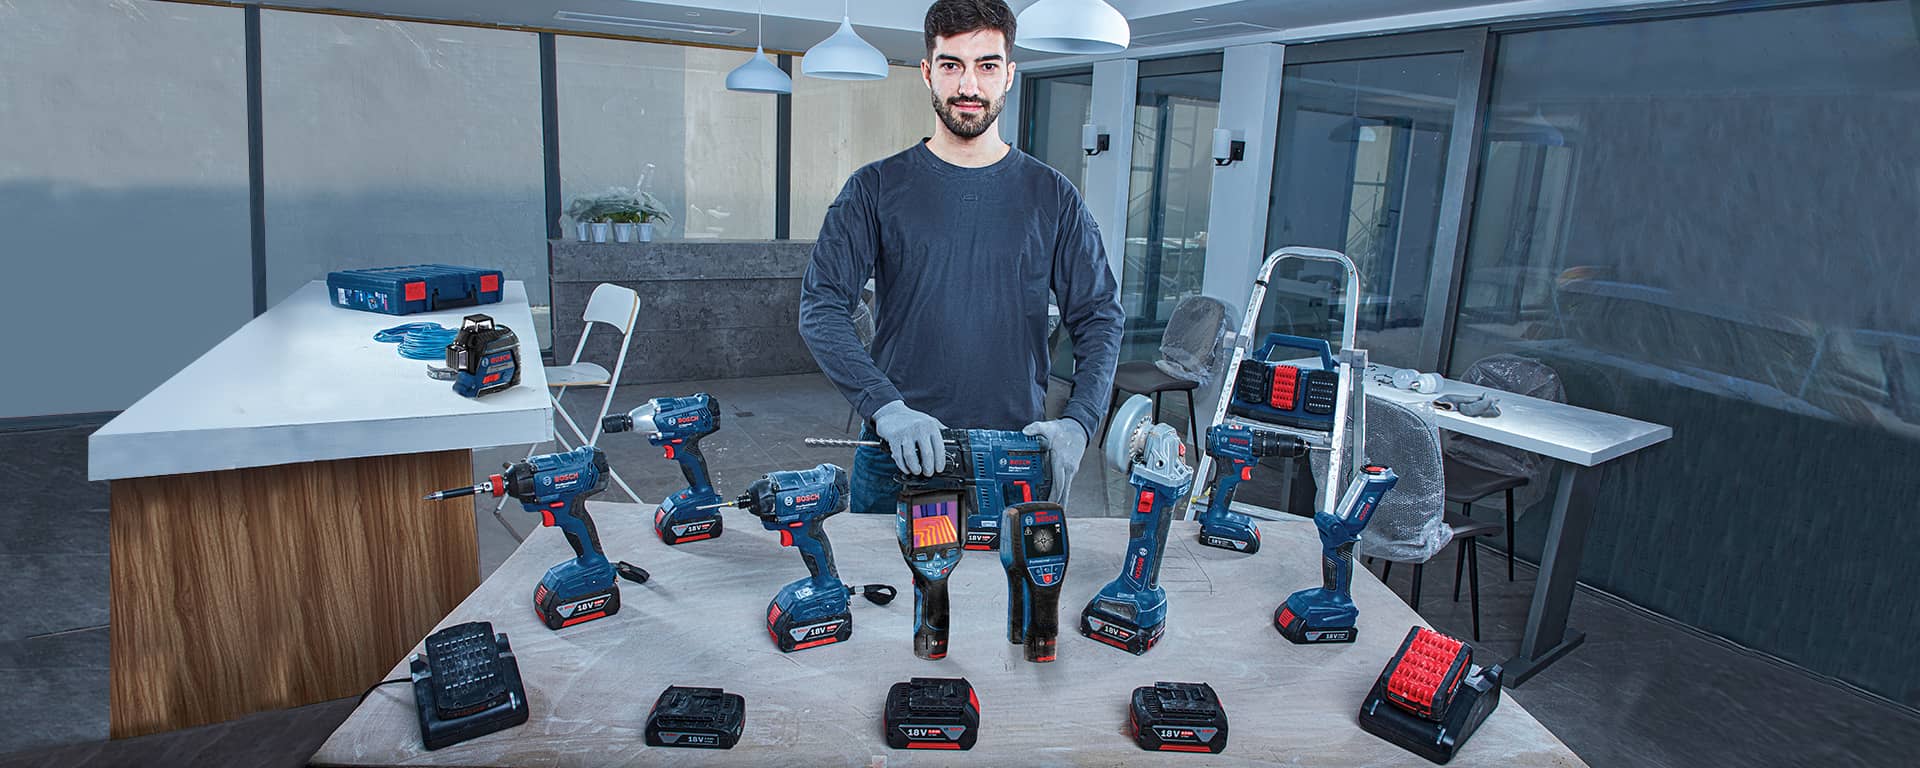 Bosch Accessories – The Power Tool Store